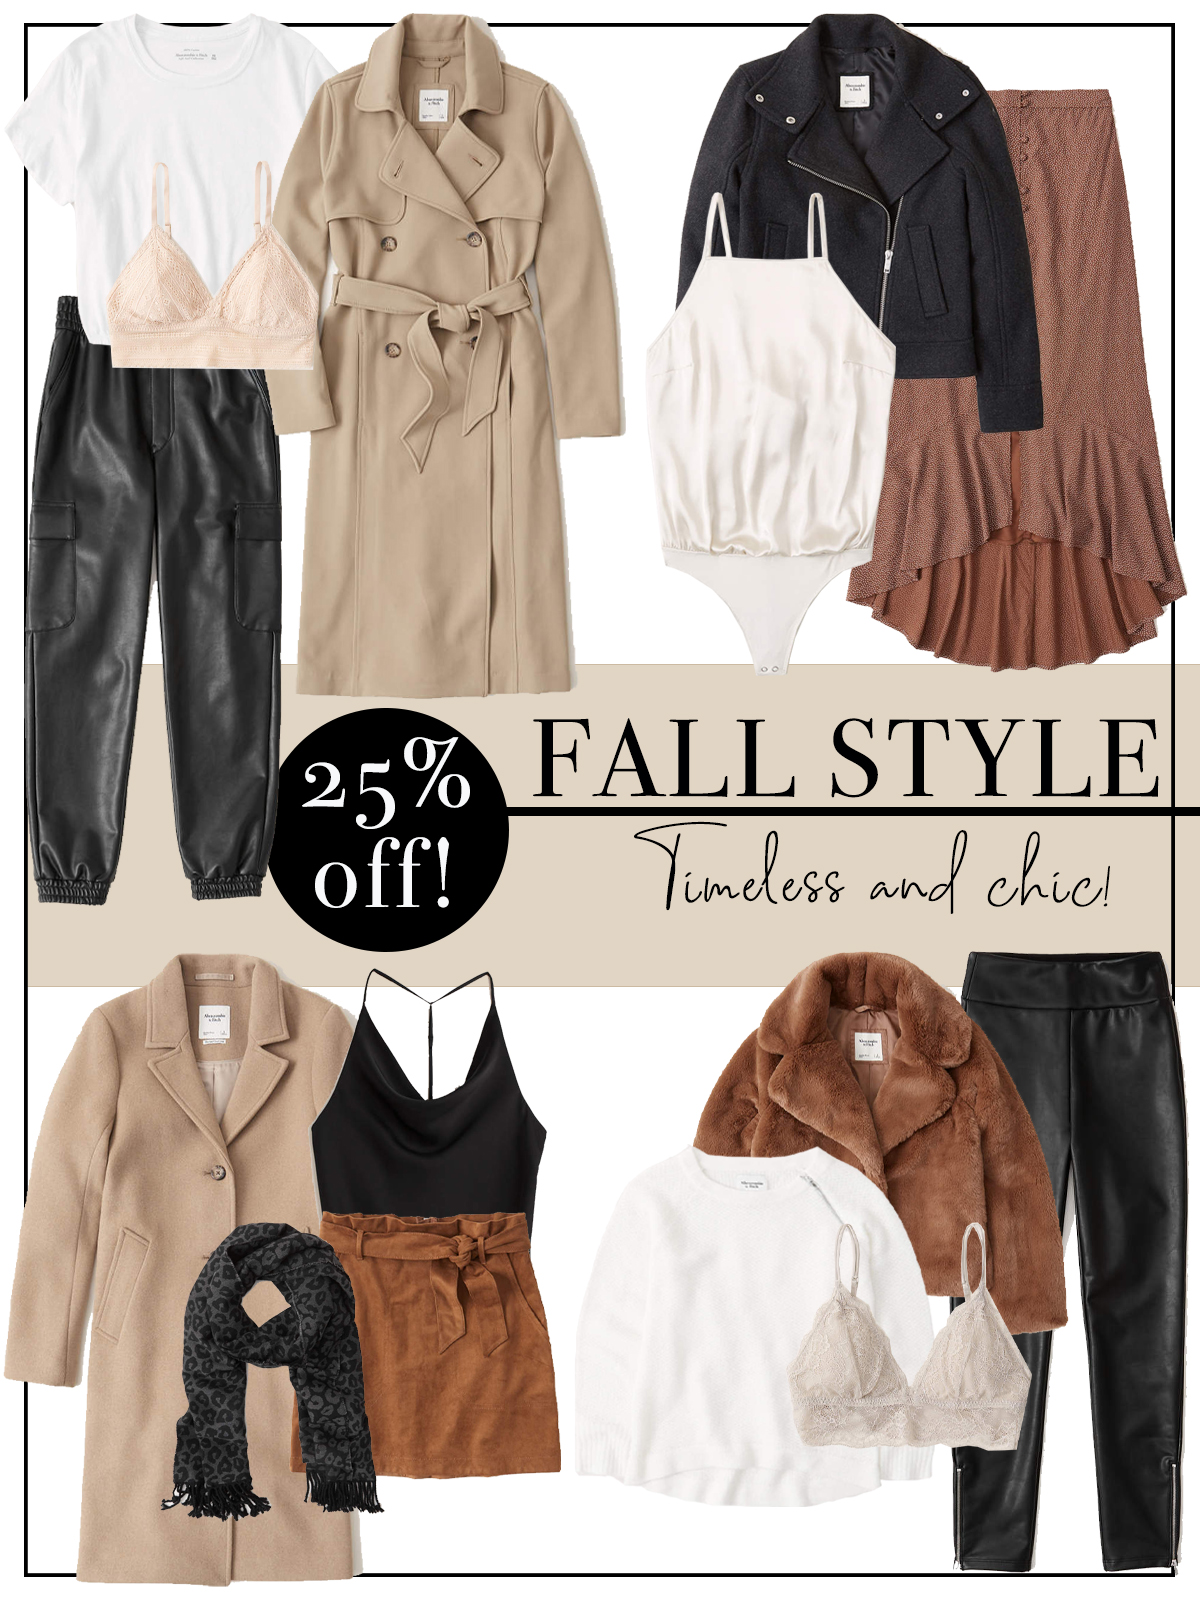 Abercrombie & Fitch fall outfit ideas.